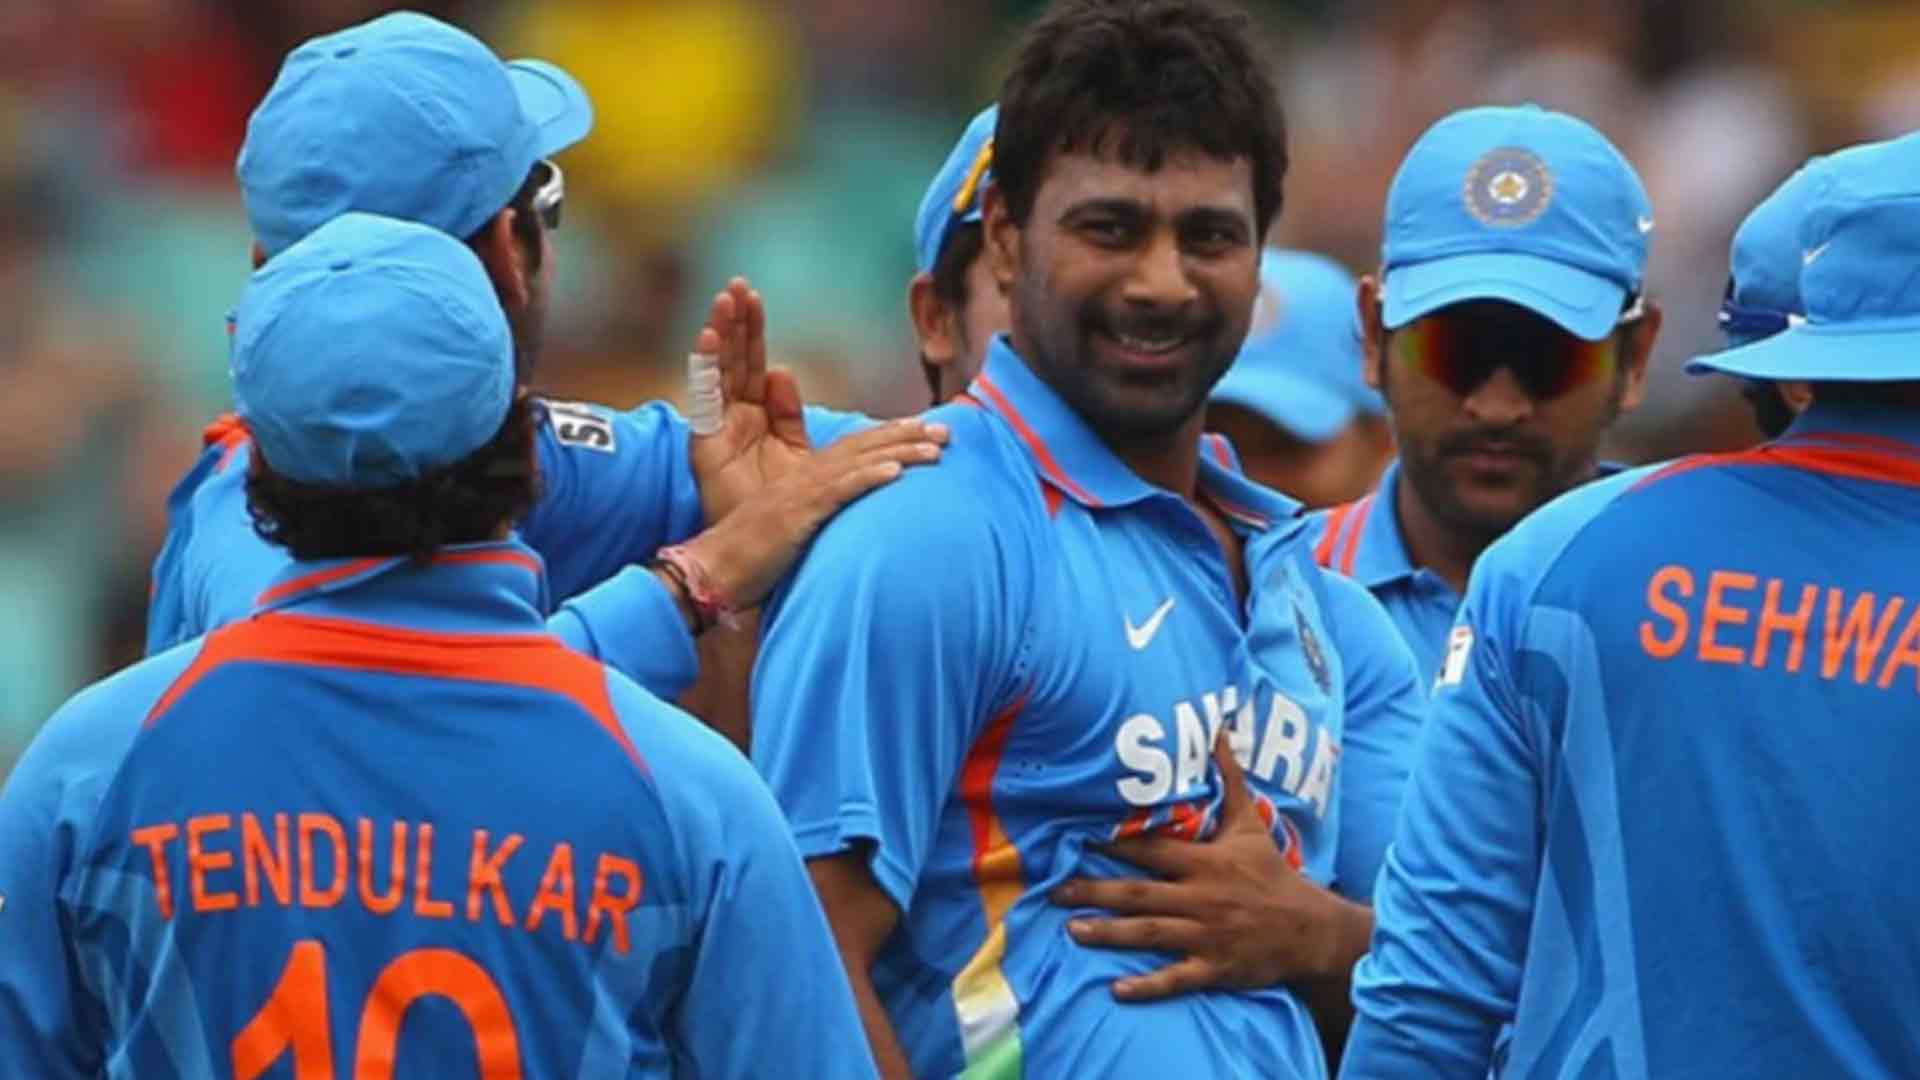 ‘I get a bad name because all Indian players drink’